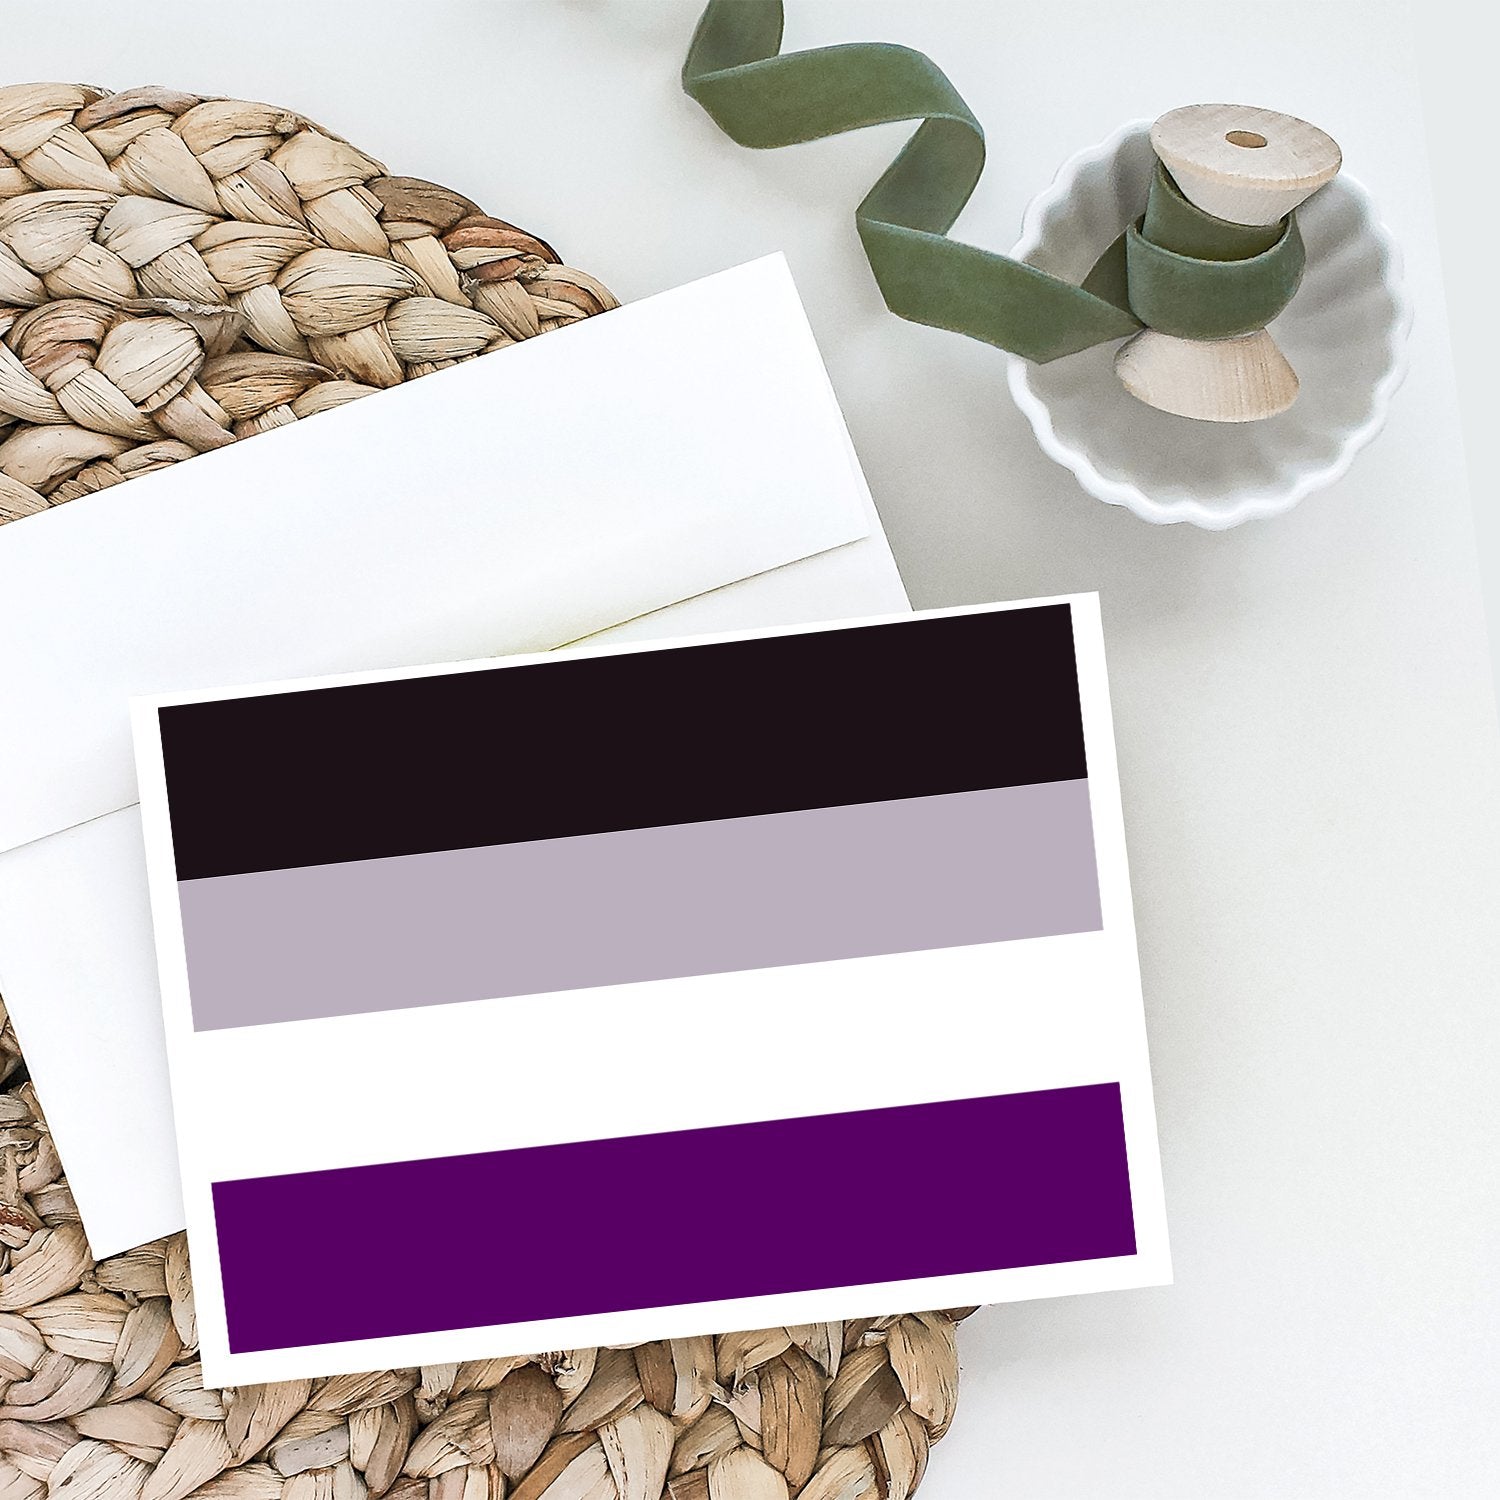 Buy this Asexual Pride Greeting Cards and Envelopes Pack of 8